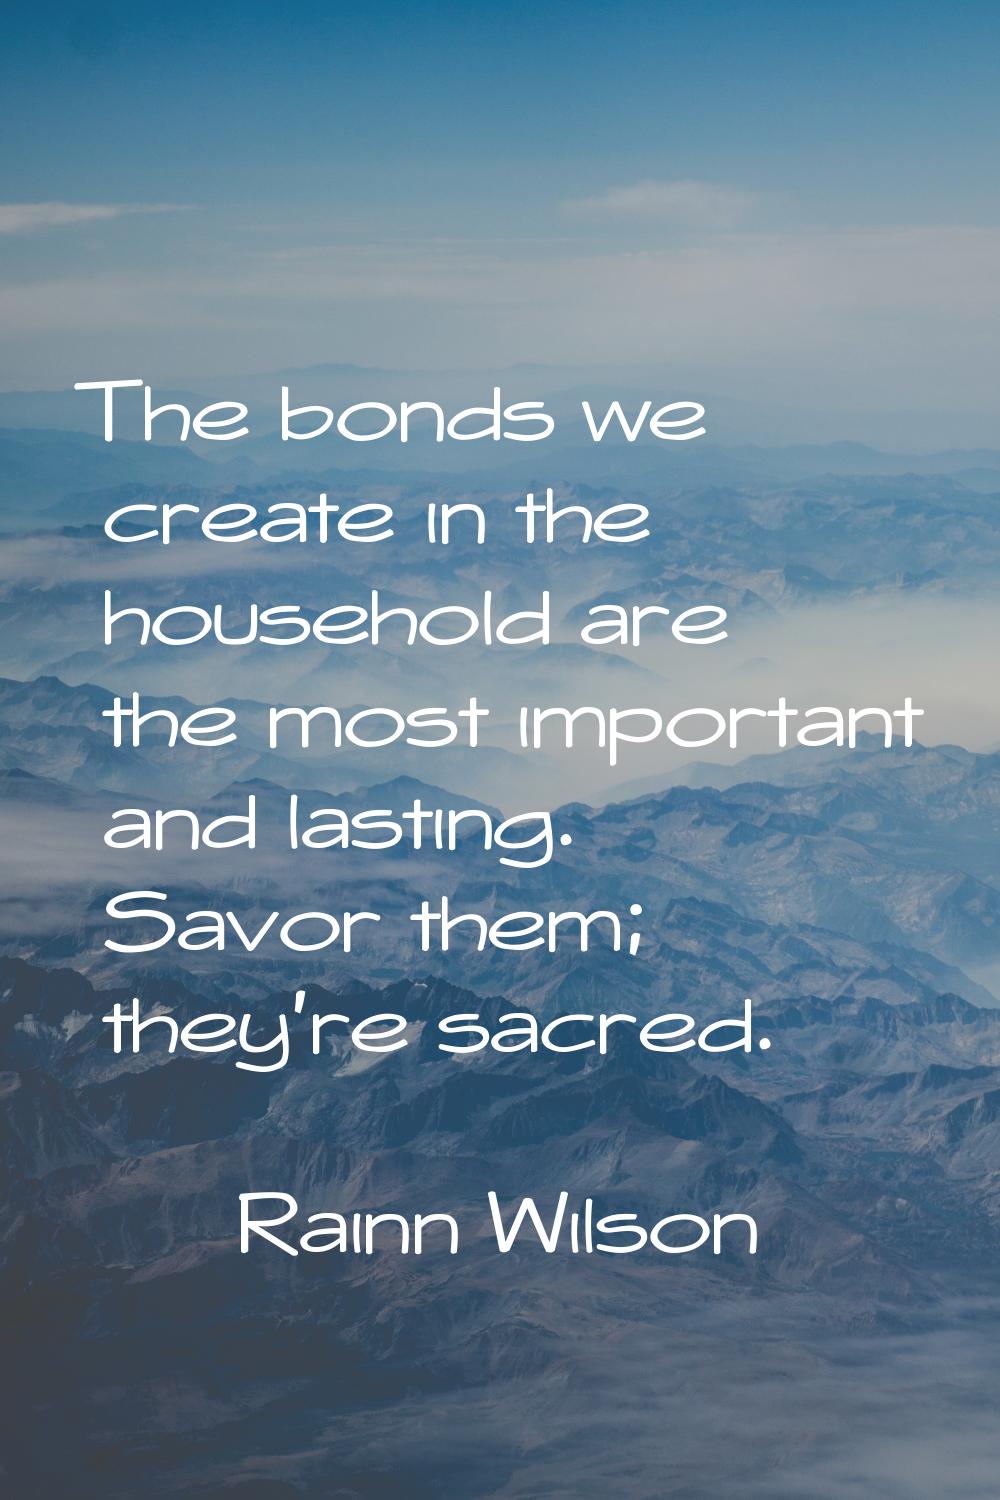 The bonds we create in the household are the most important and lasting. Savor them; they're sacred